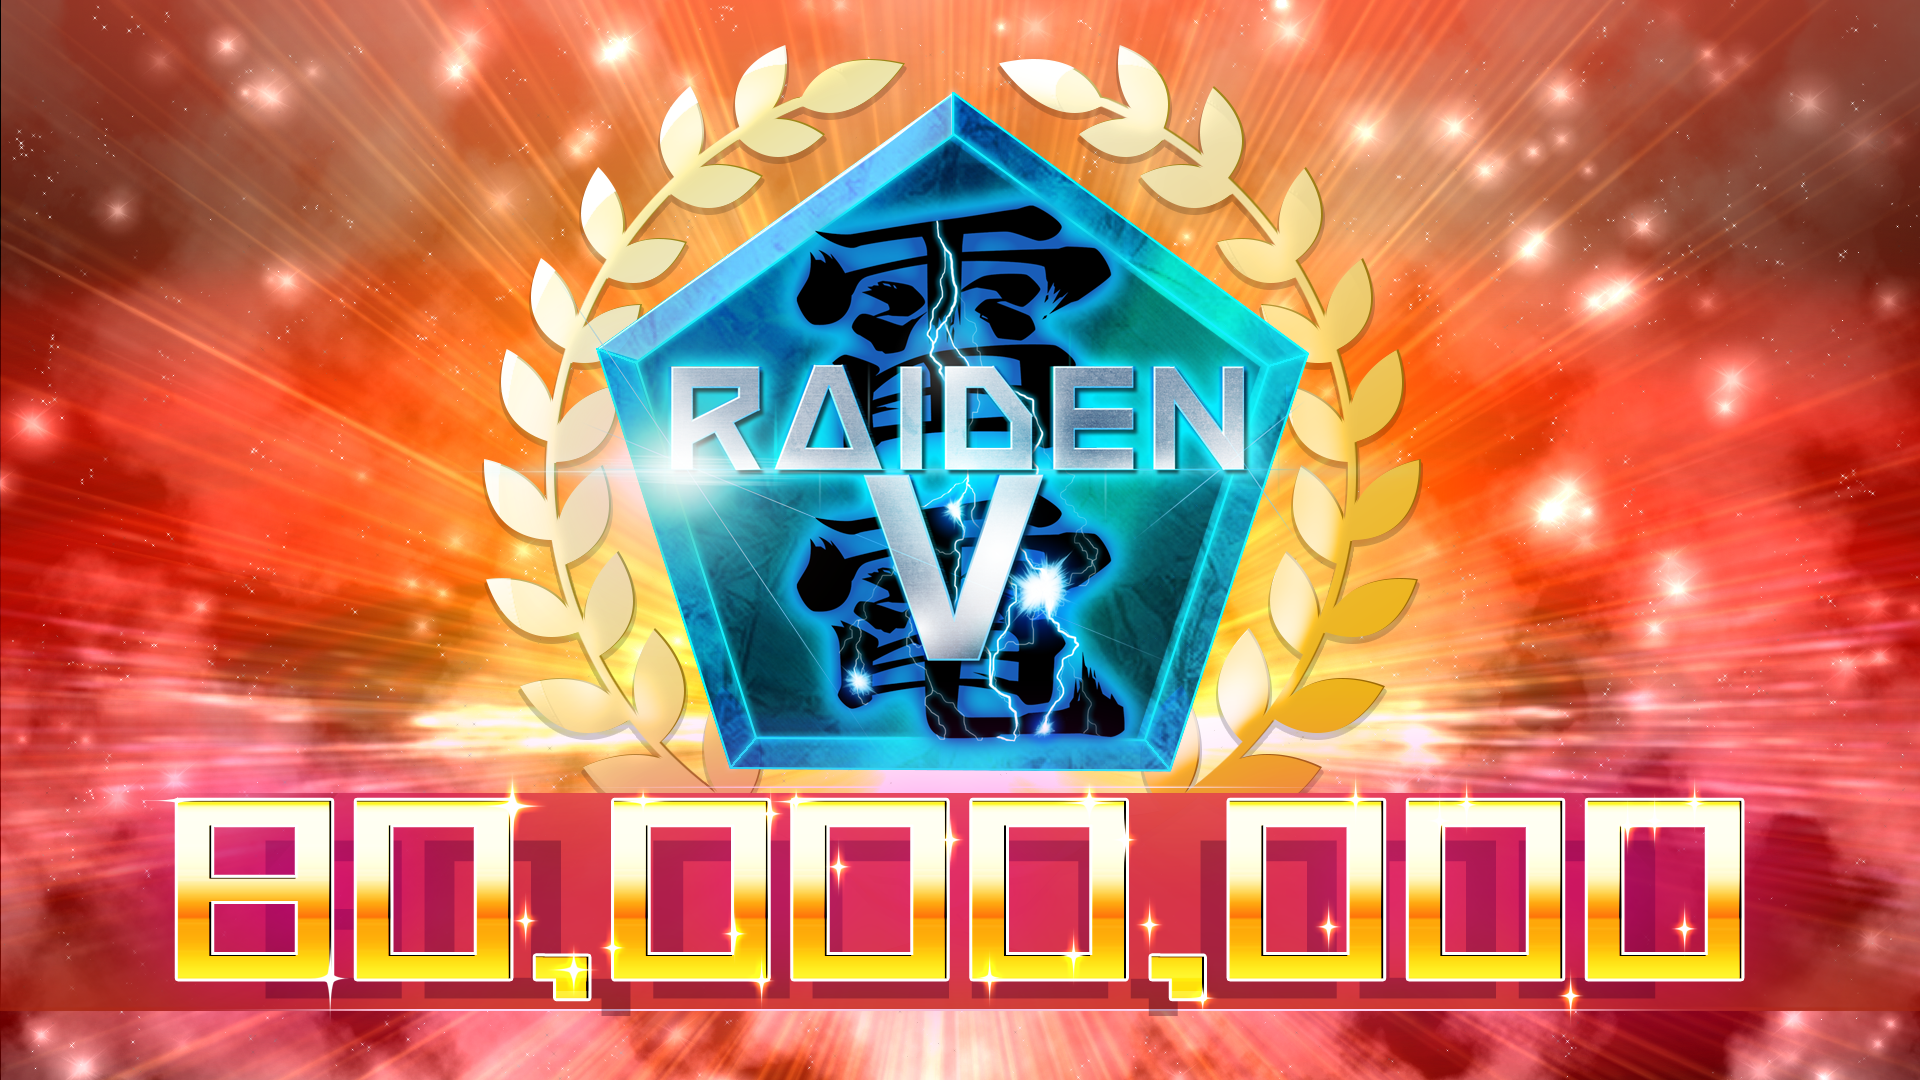 Icon for 80,000,000 Points